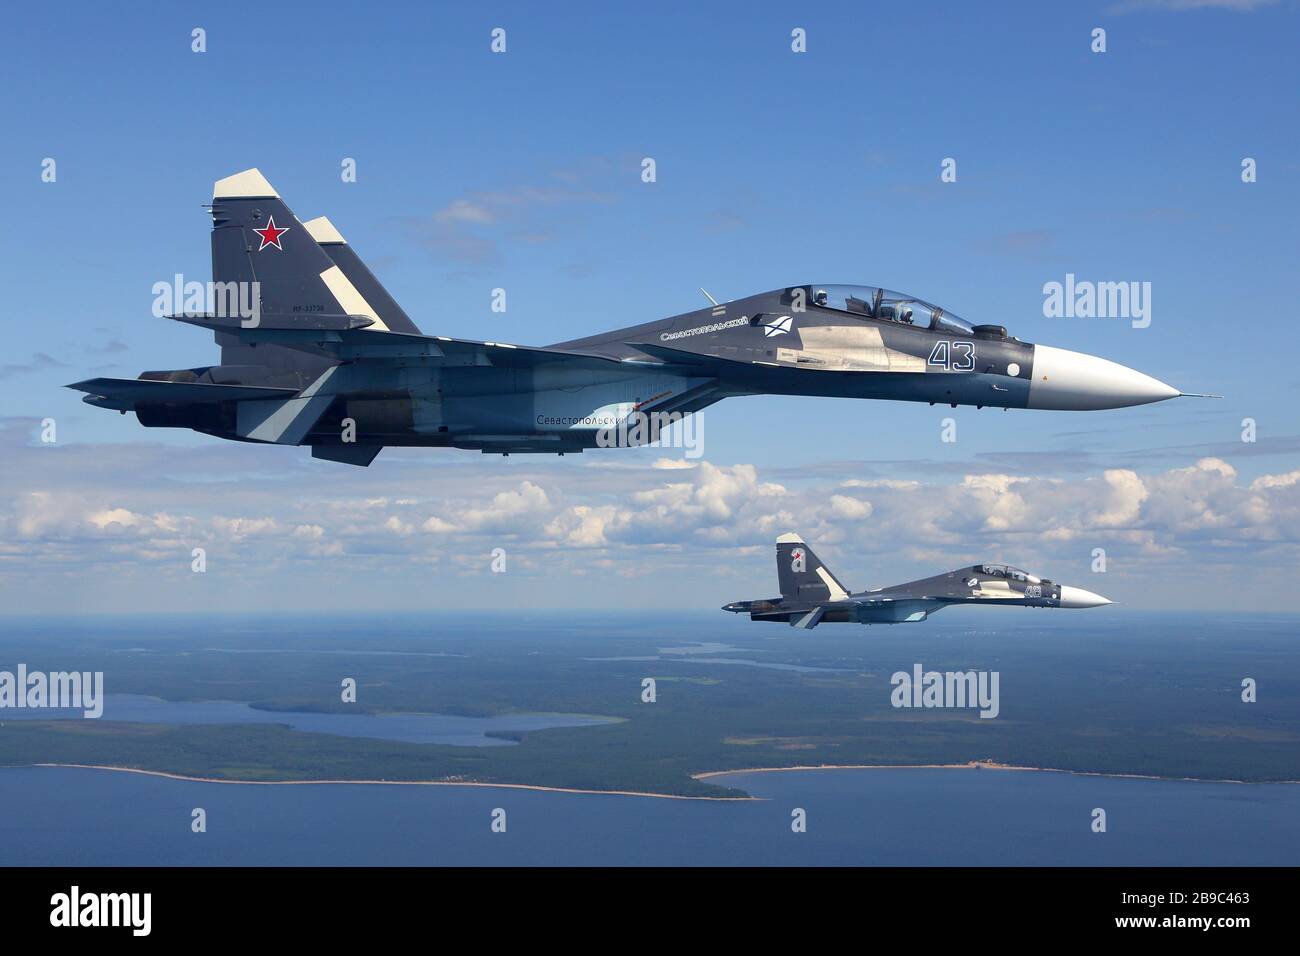 Su-30SM jet fighters of the Russian Navy flying over Gulf of Finland, Russia. Stock Photo